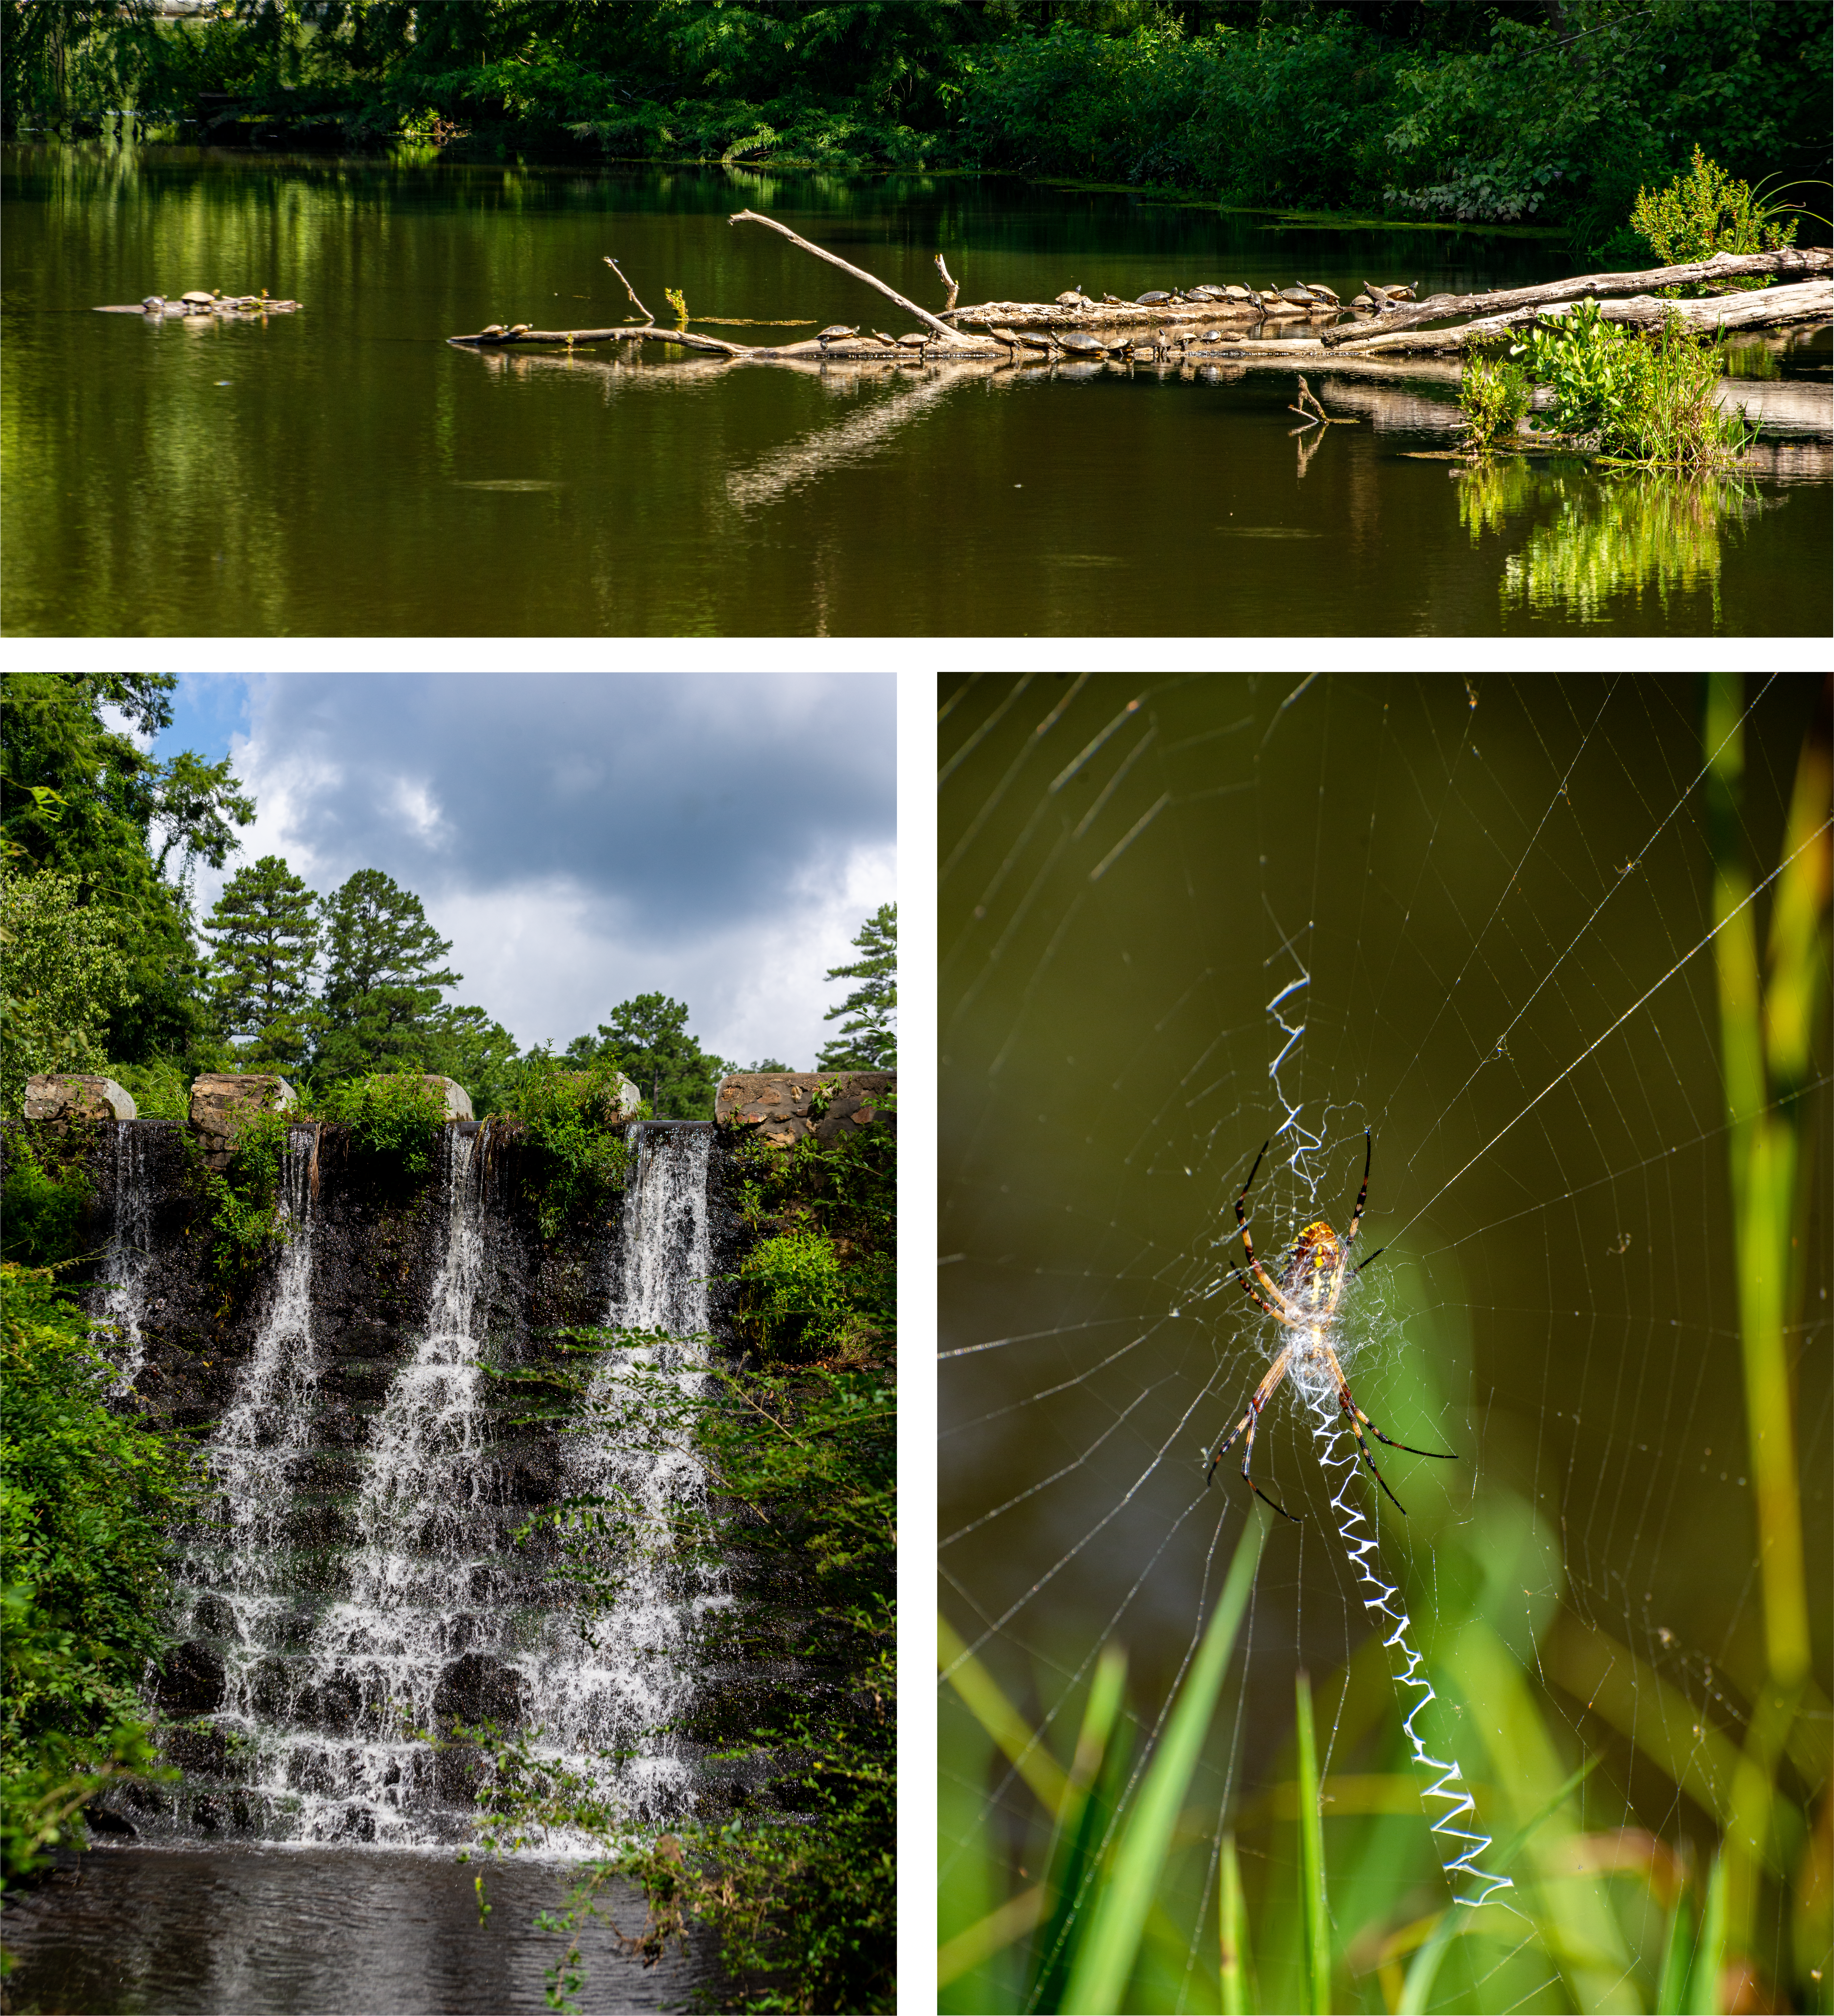 Stone Bridge Area features Ricks's pond, a waterfall, and wildlife like spiders and turtles